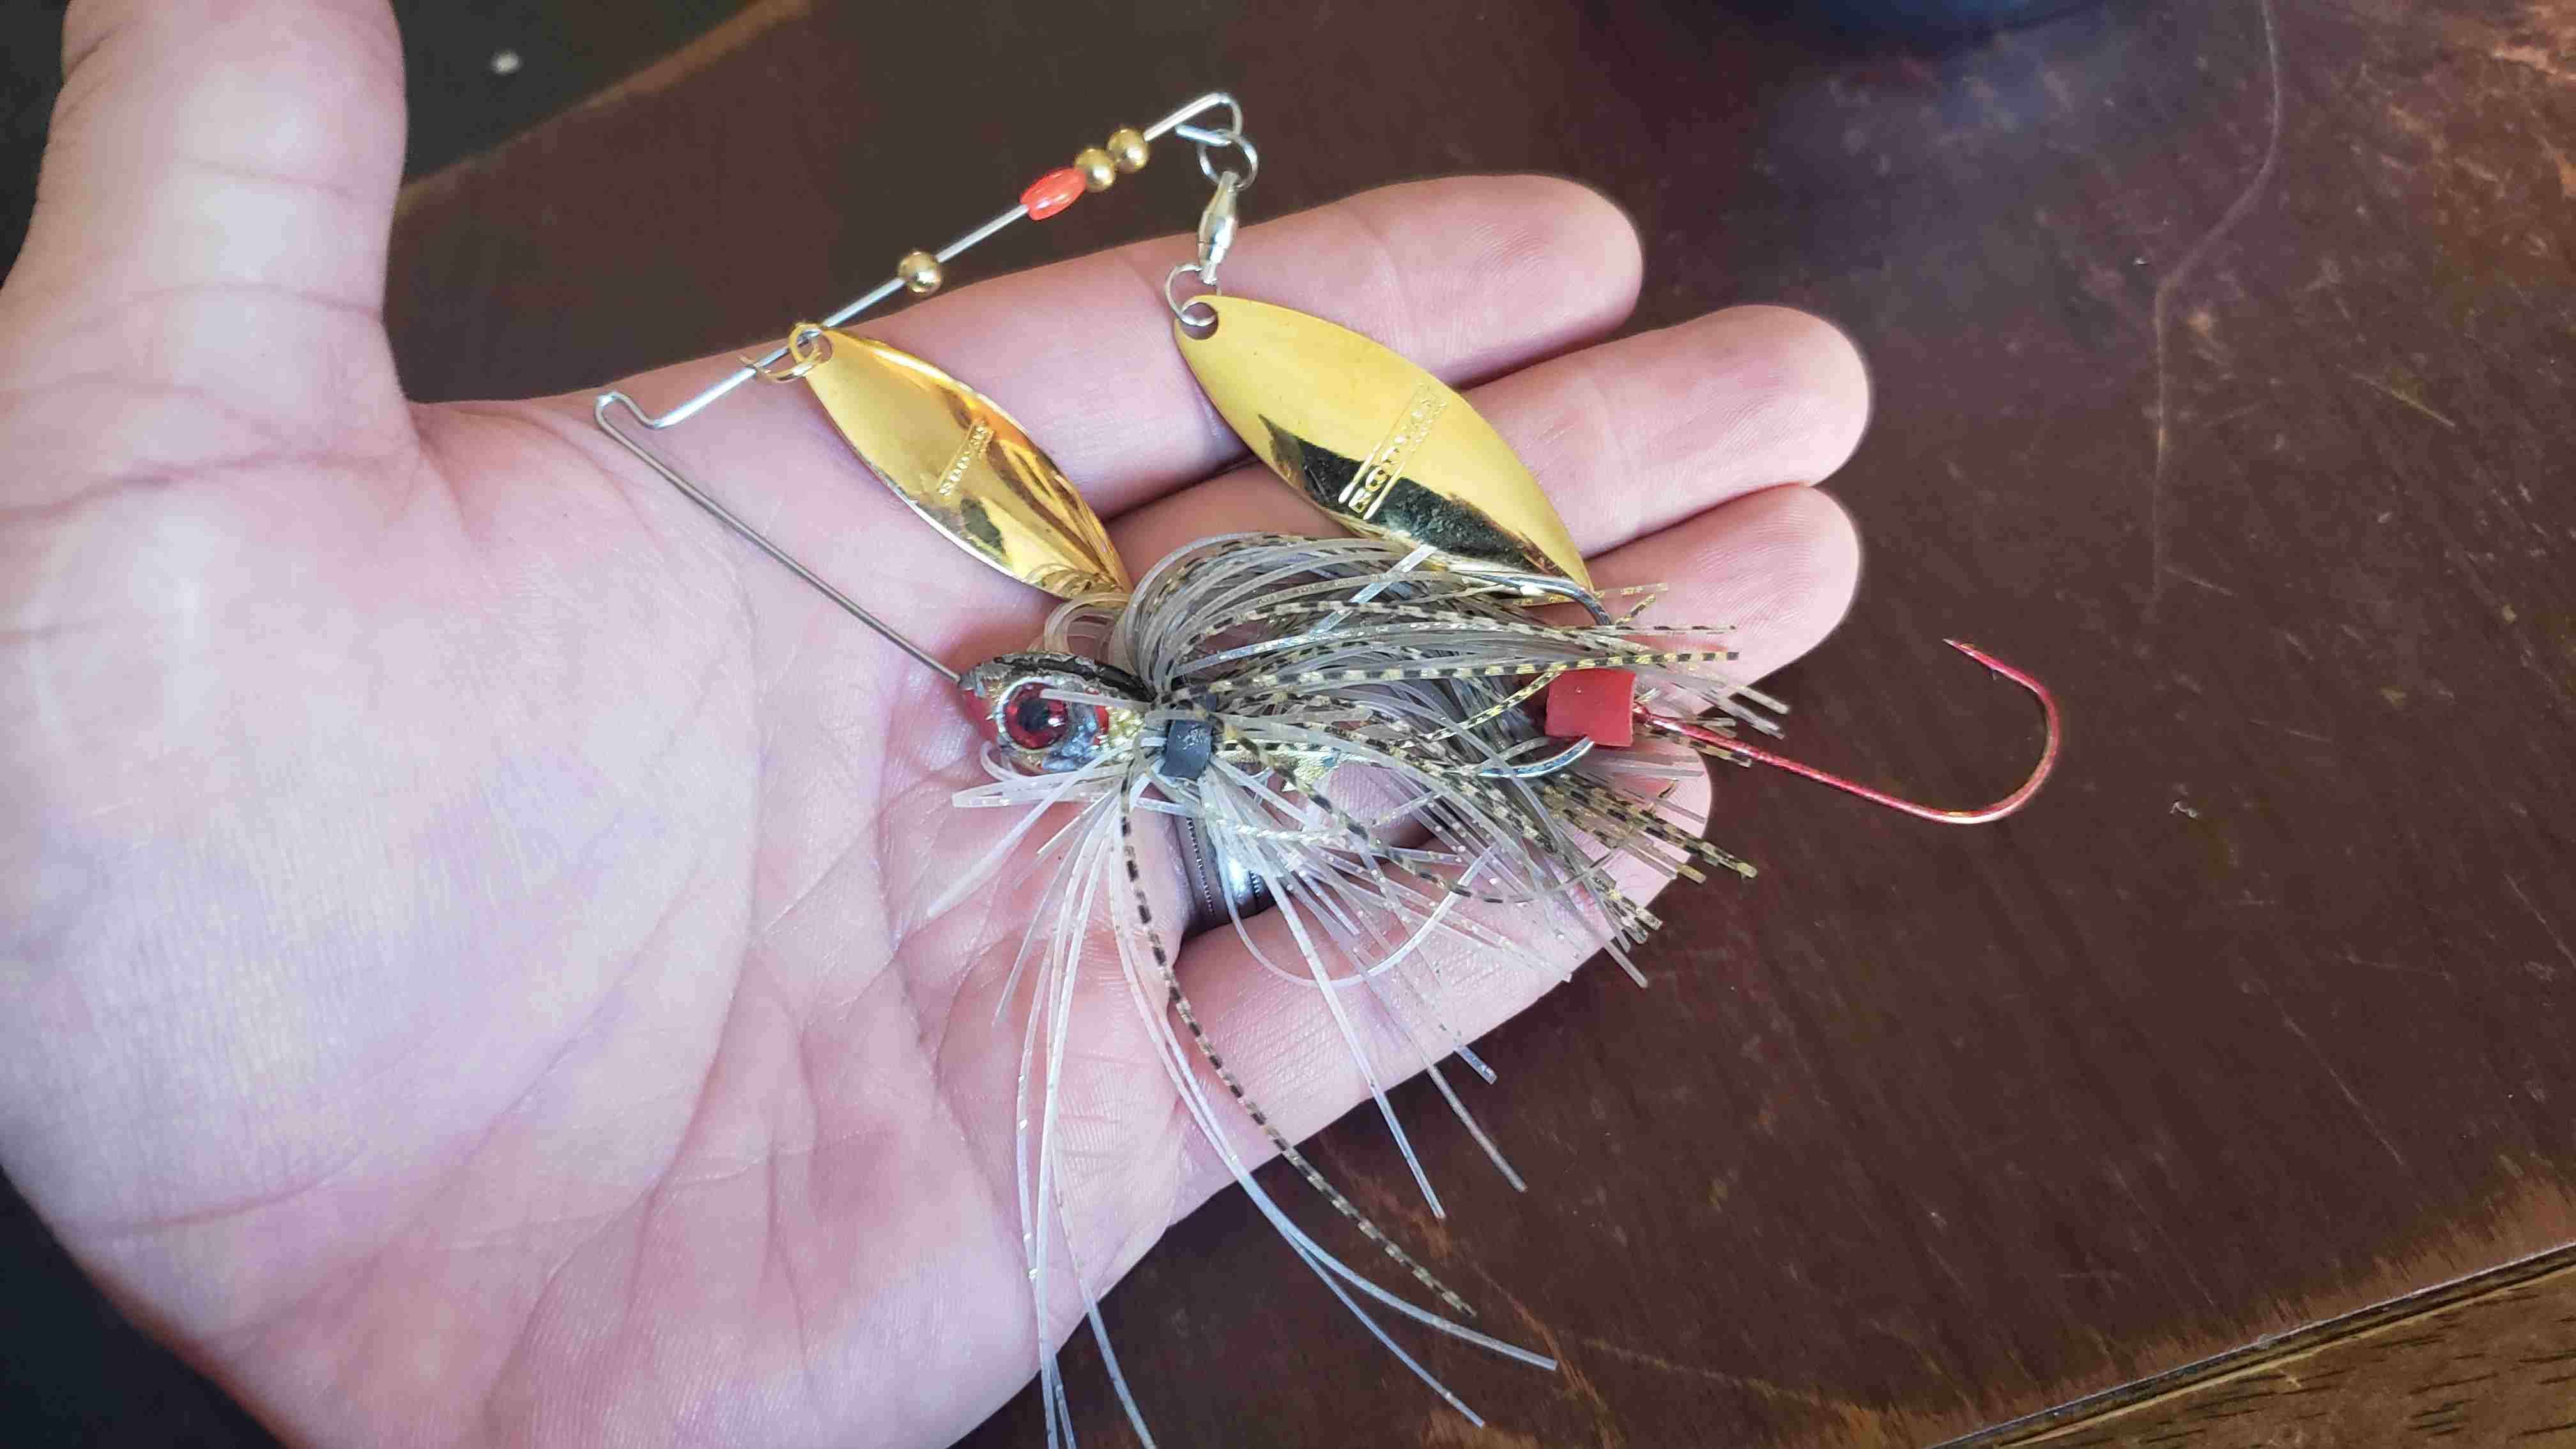 Looking for a producing spinnerbait on the cheap that also